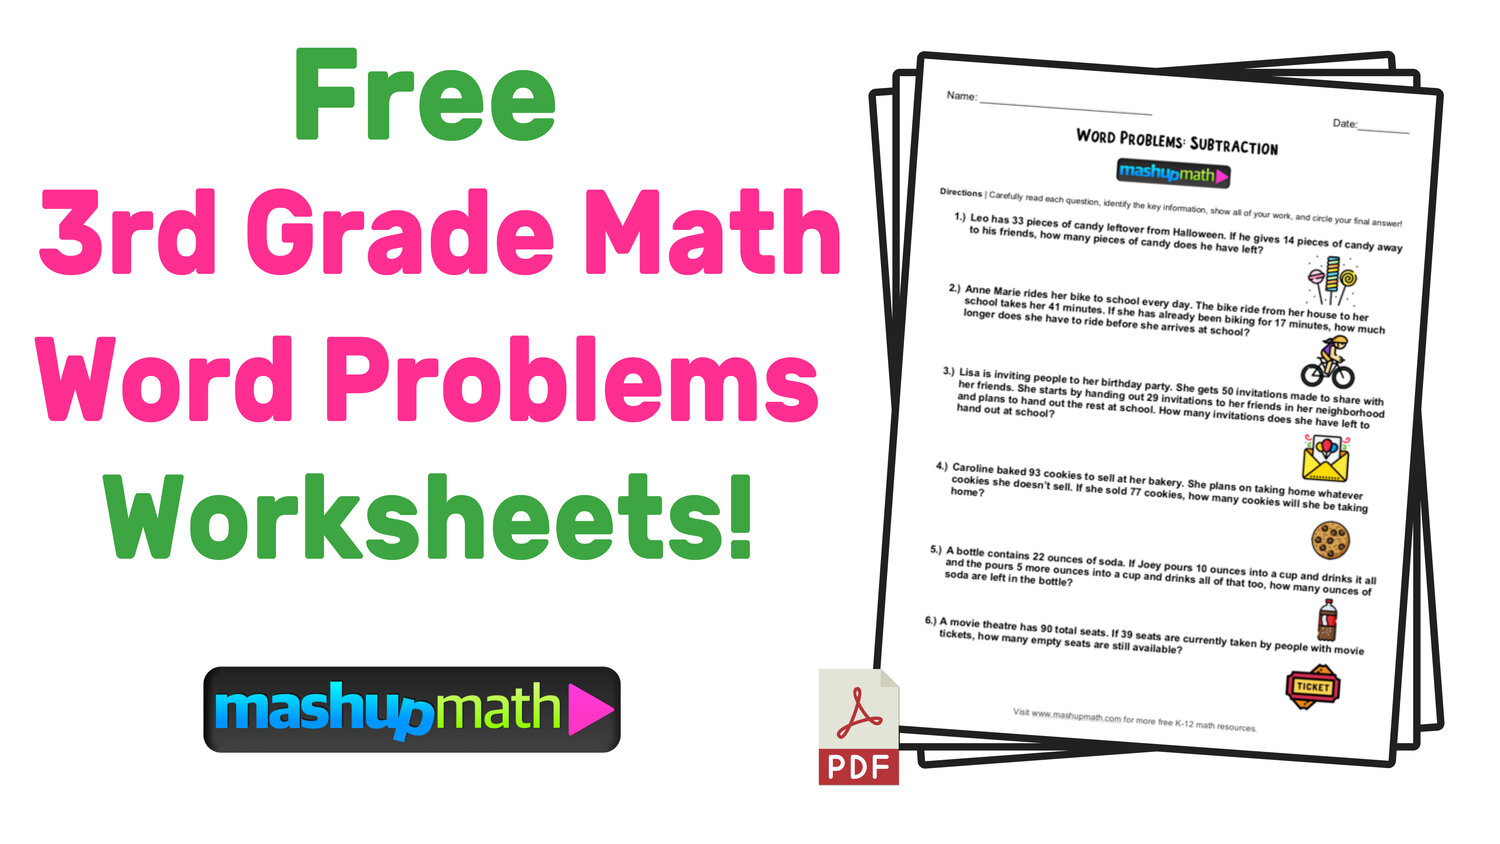 3rd Grade Math Word Problems Free Worksheets with Answers — Mashup Math